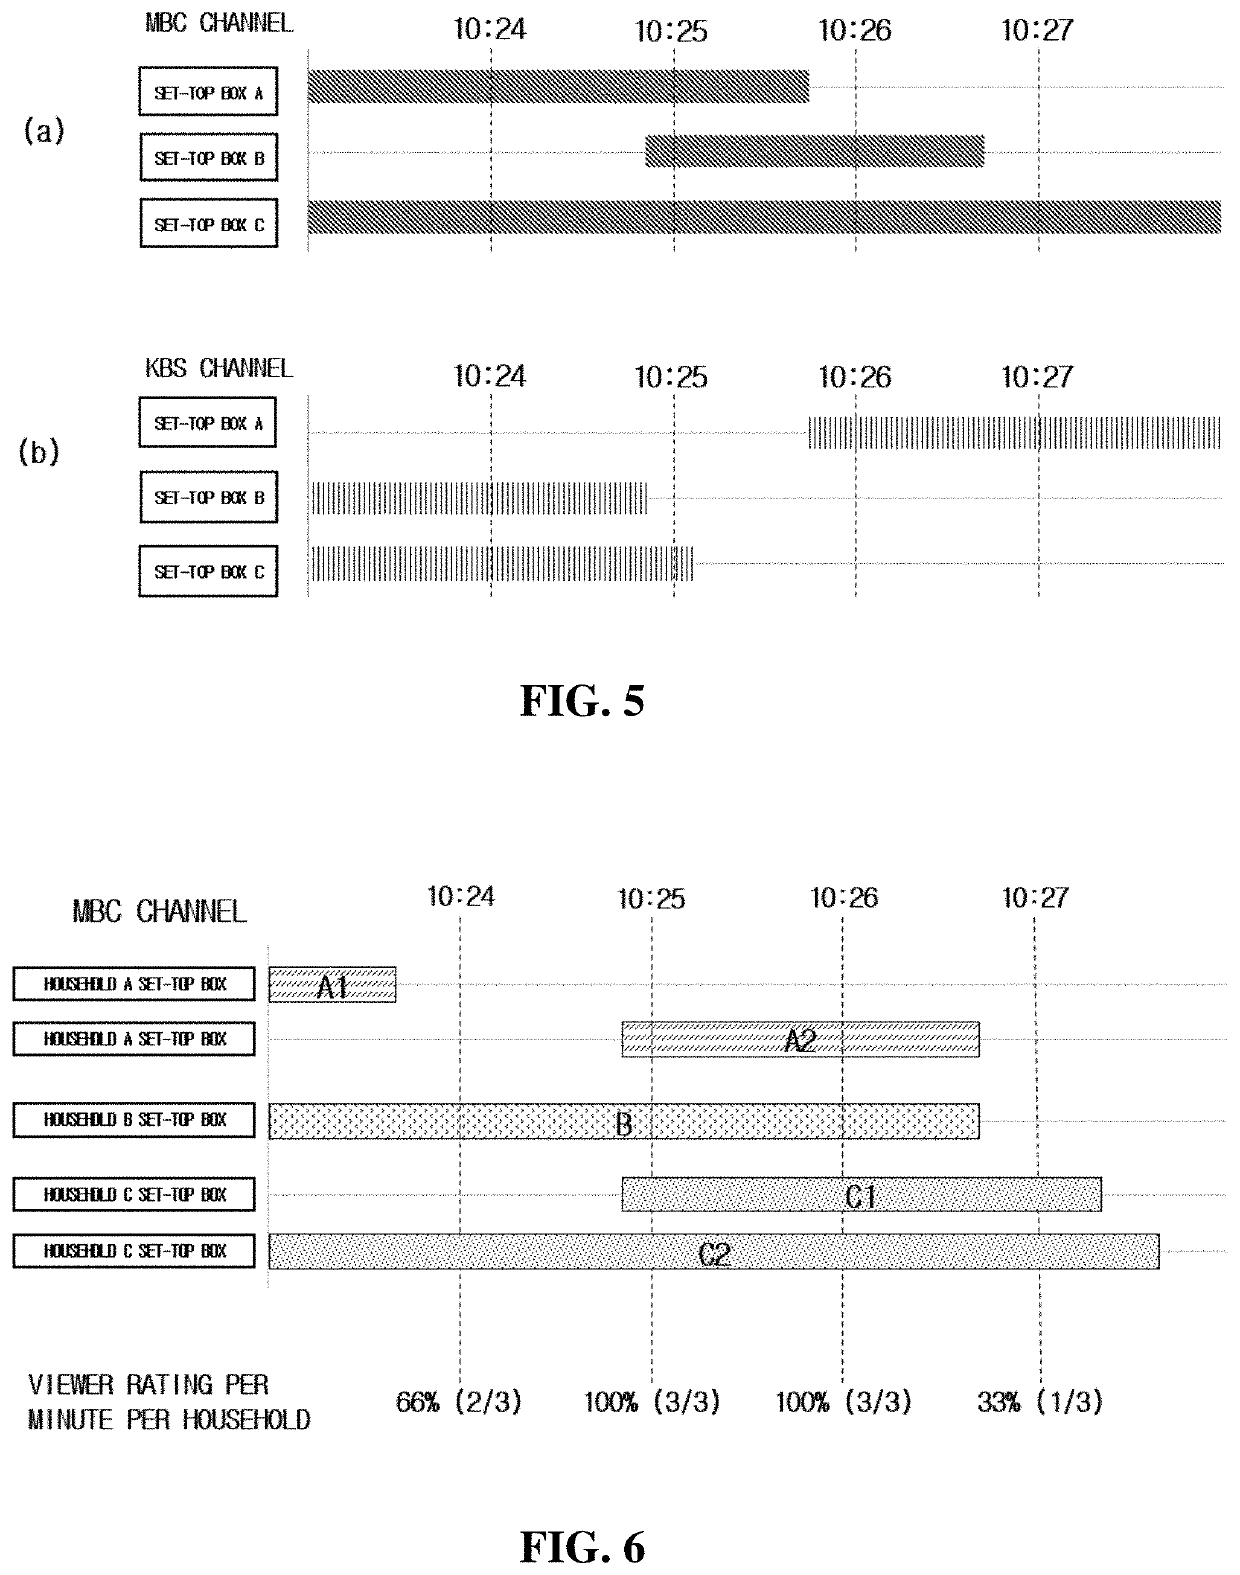 Apparatus and method for calculating viewer rating by using channel change data